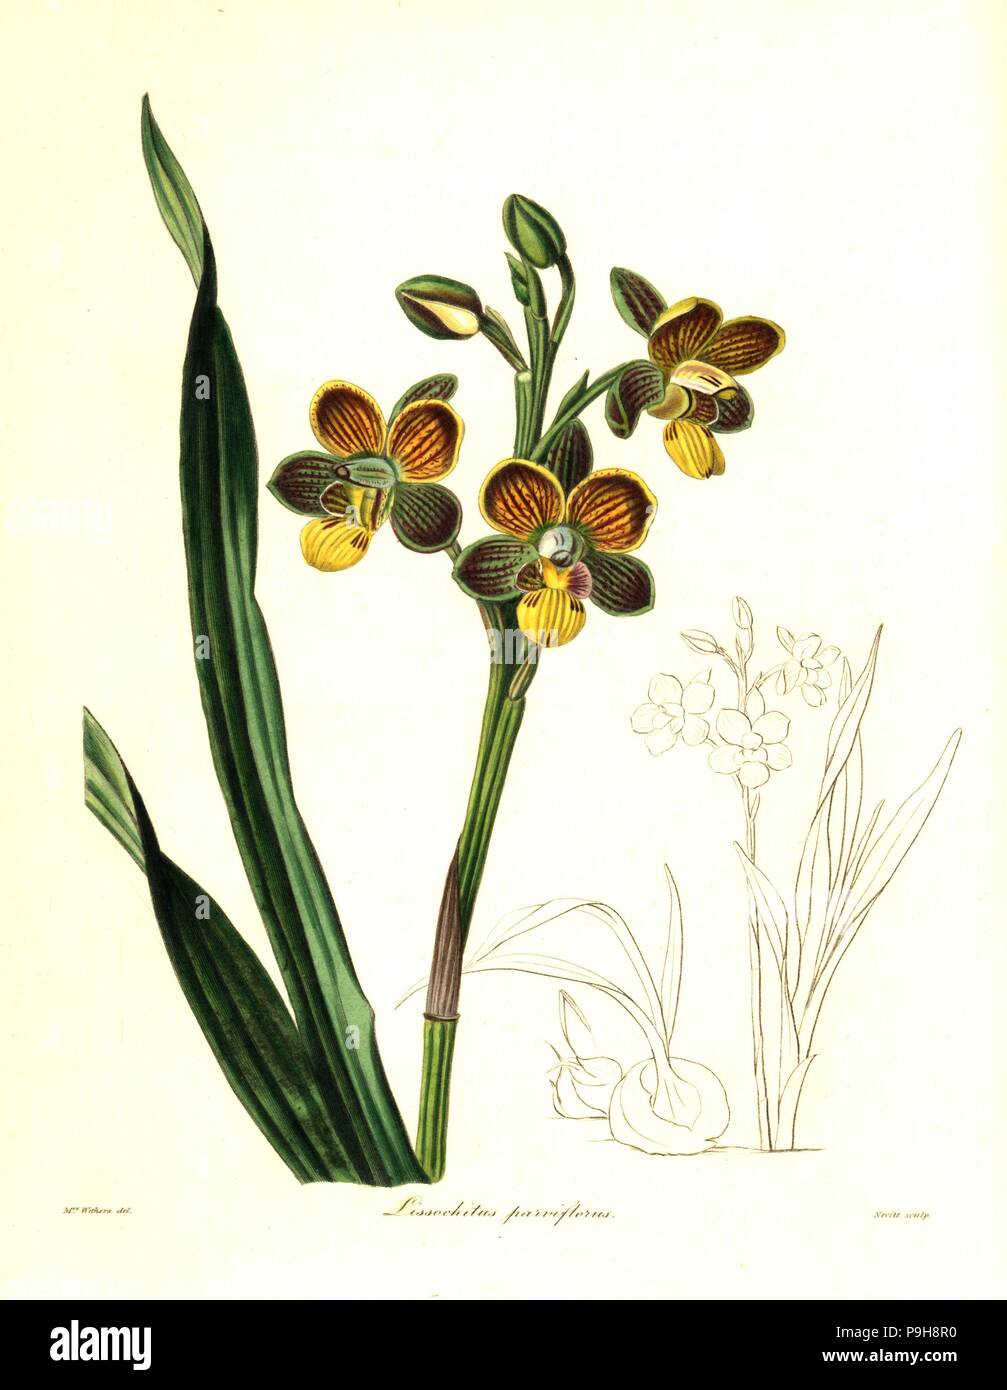 Eulophia parviflora orchid (Small-flowered lissochilus, Lissochilus parviflorus). Handcoloured copperplate engraving by S. Nevitt after a botanical illustration by Mrs Augusta Withers from Benjamin Maund and the Rev. John Stevens Henslow's The Botanist, London, 1836. Stock Photo